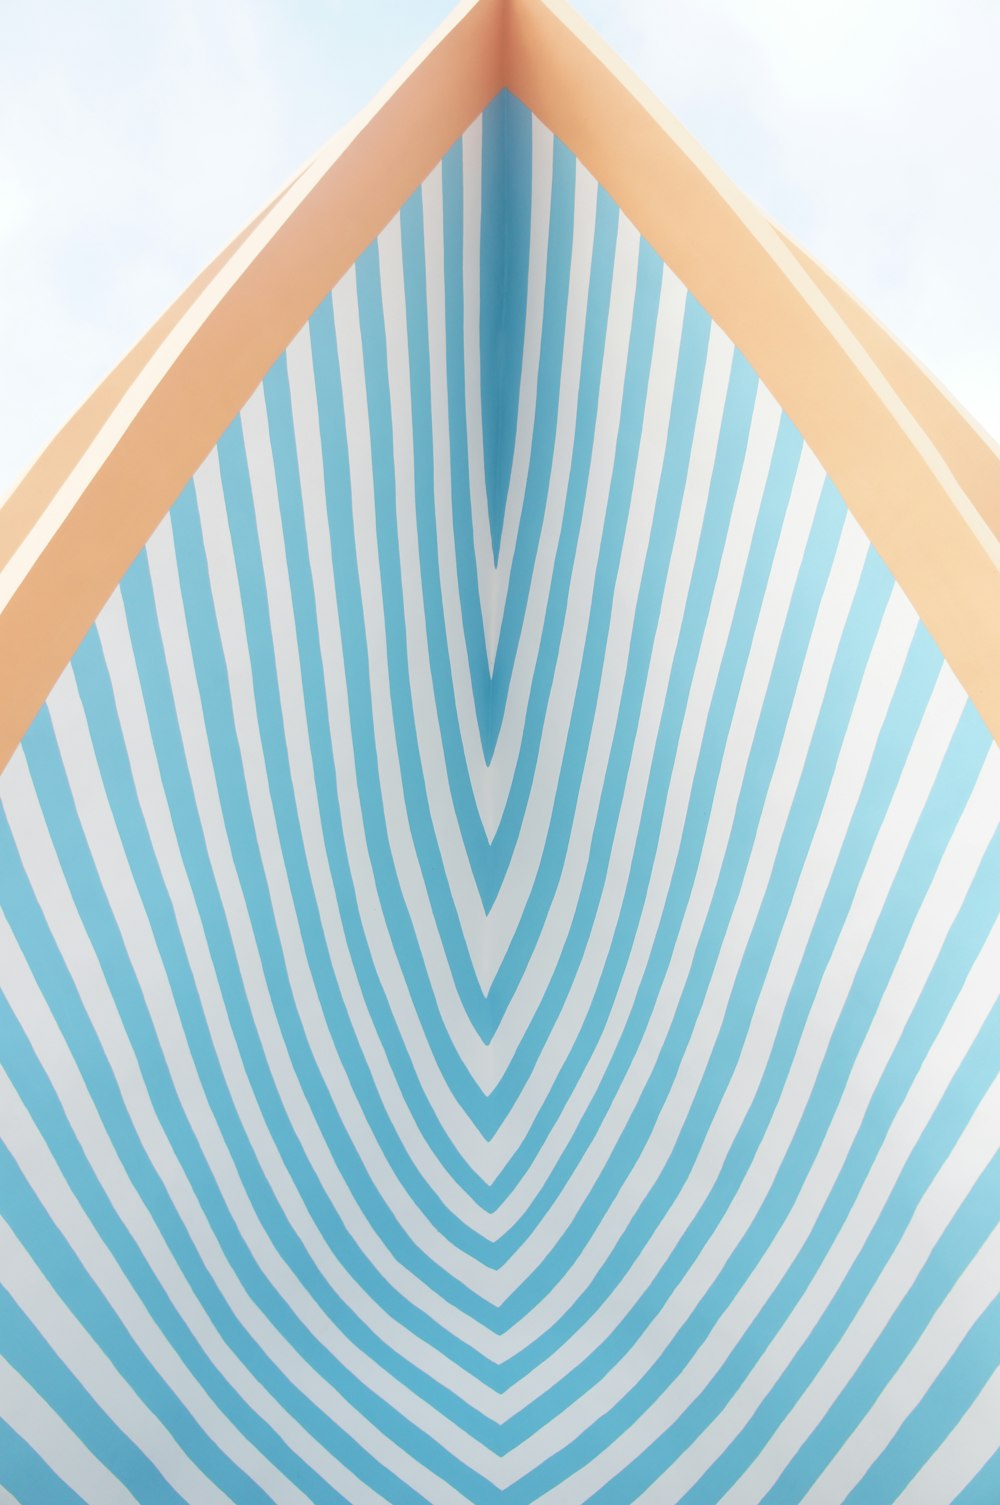 white and blue striped illustration